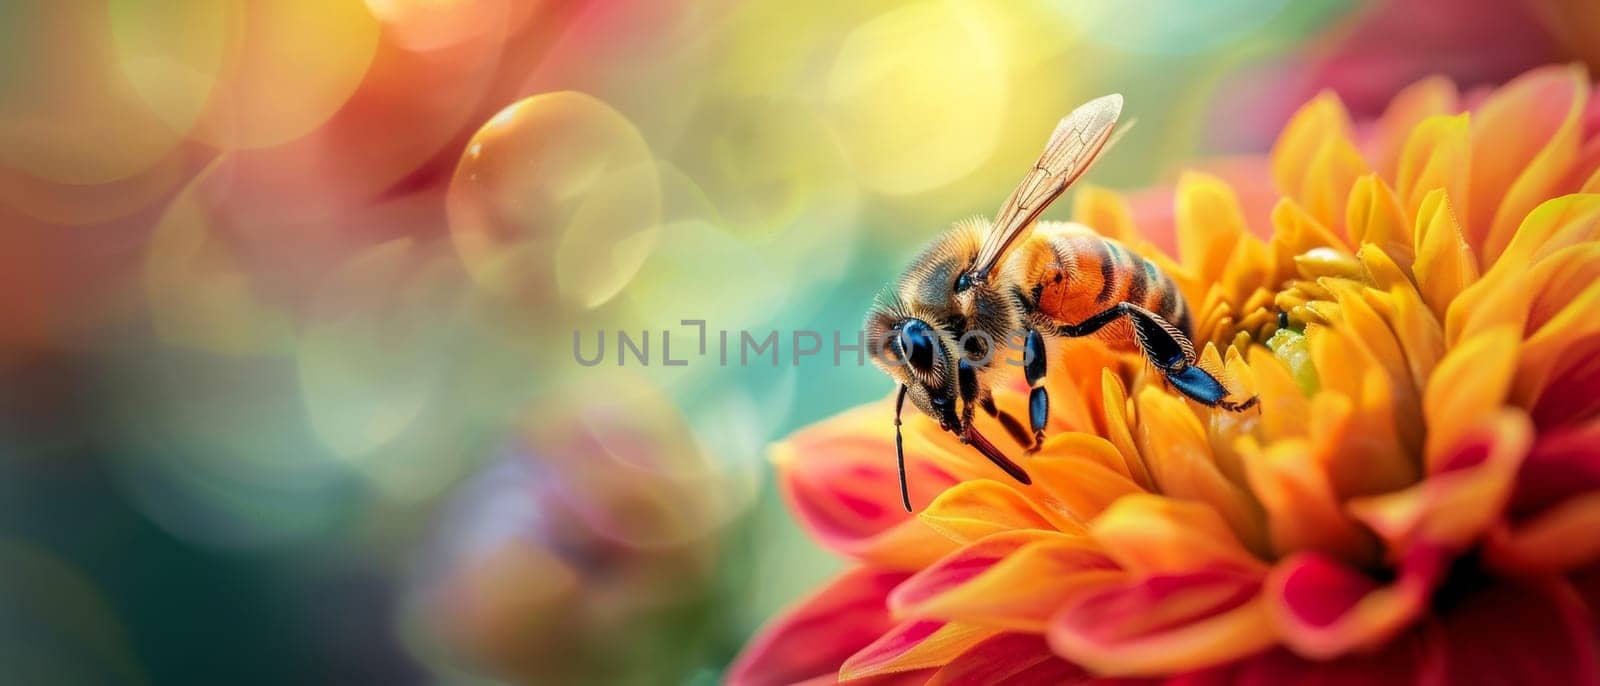 Immersed in the depths of a dahlia's petals, a bee is a study in contrast against the warm floral canvas